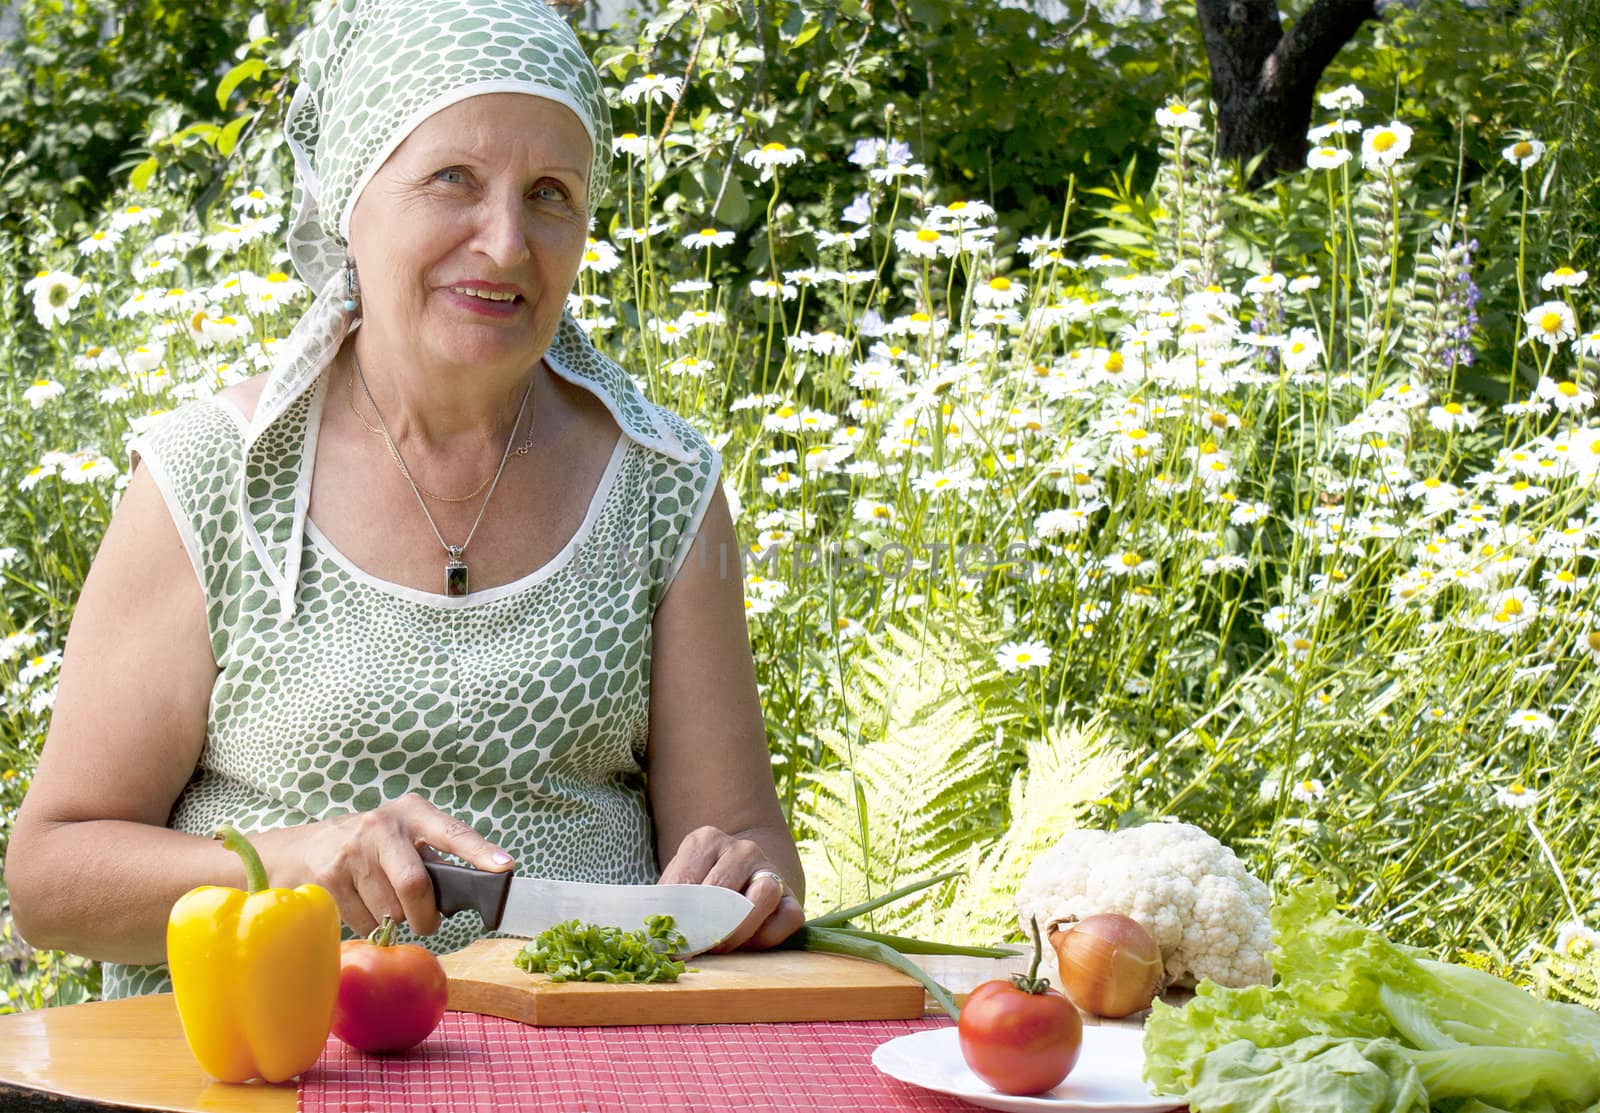 The adult woman with a smile cuts salad from fresh appetizing vegetables